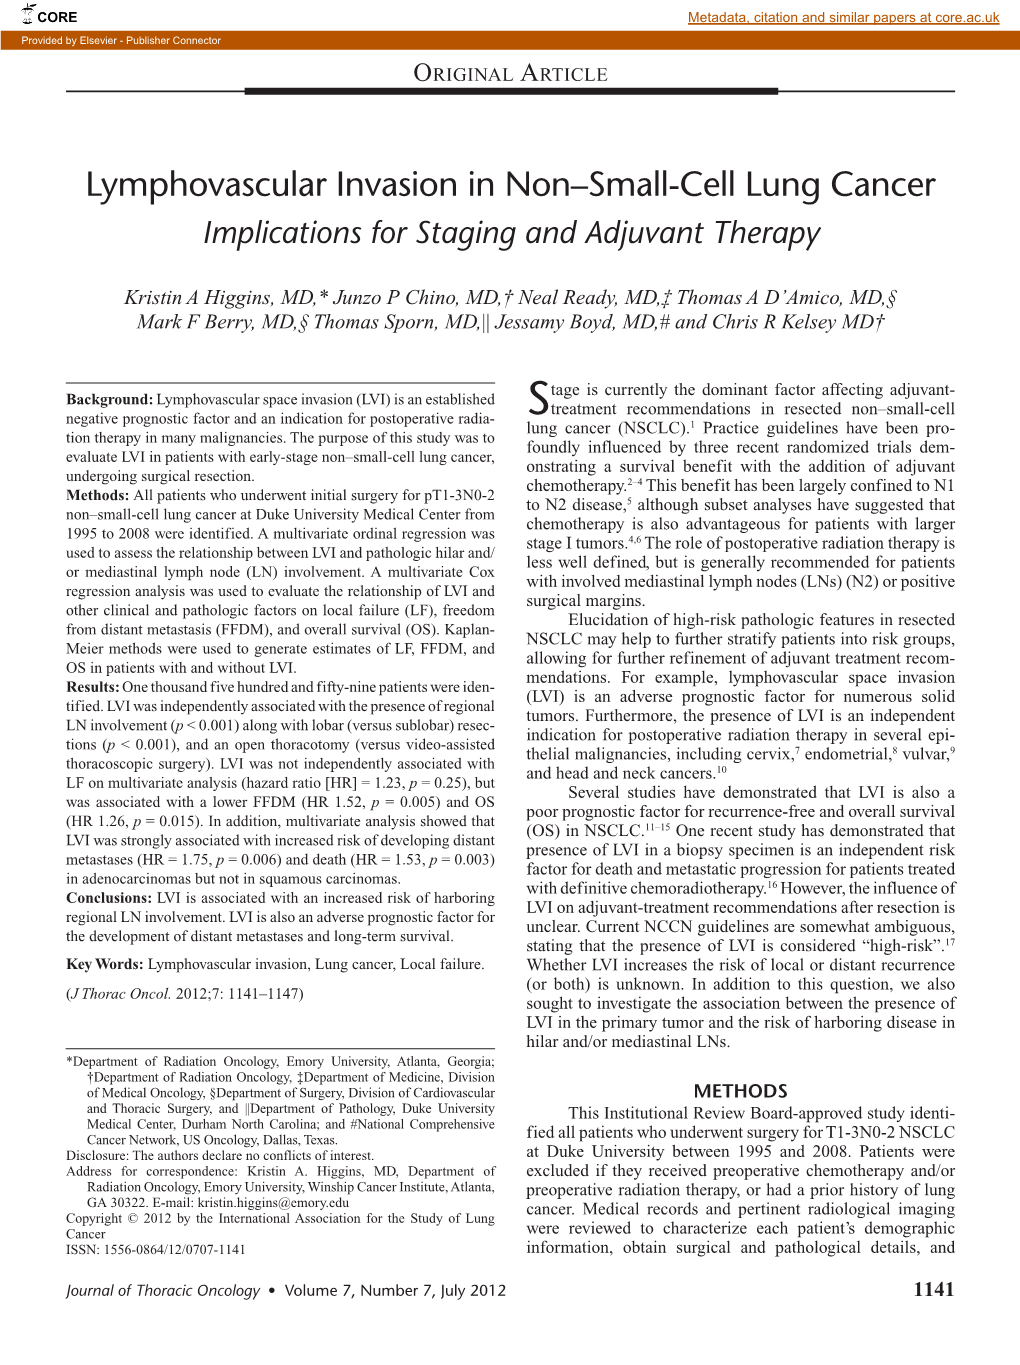 Lymphovascular Invasion in Non–Small-Cell Lung Cancer Implications for Staging and Adjuvant Therapy